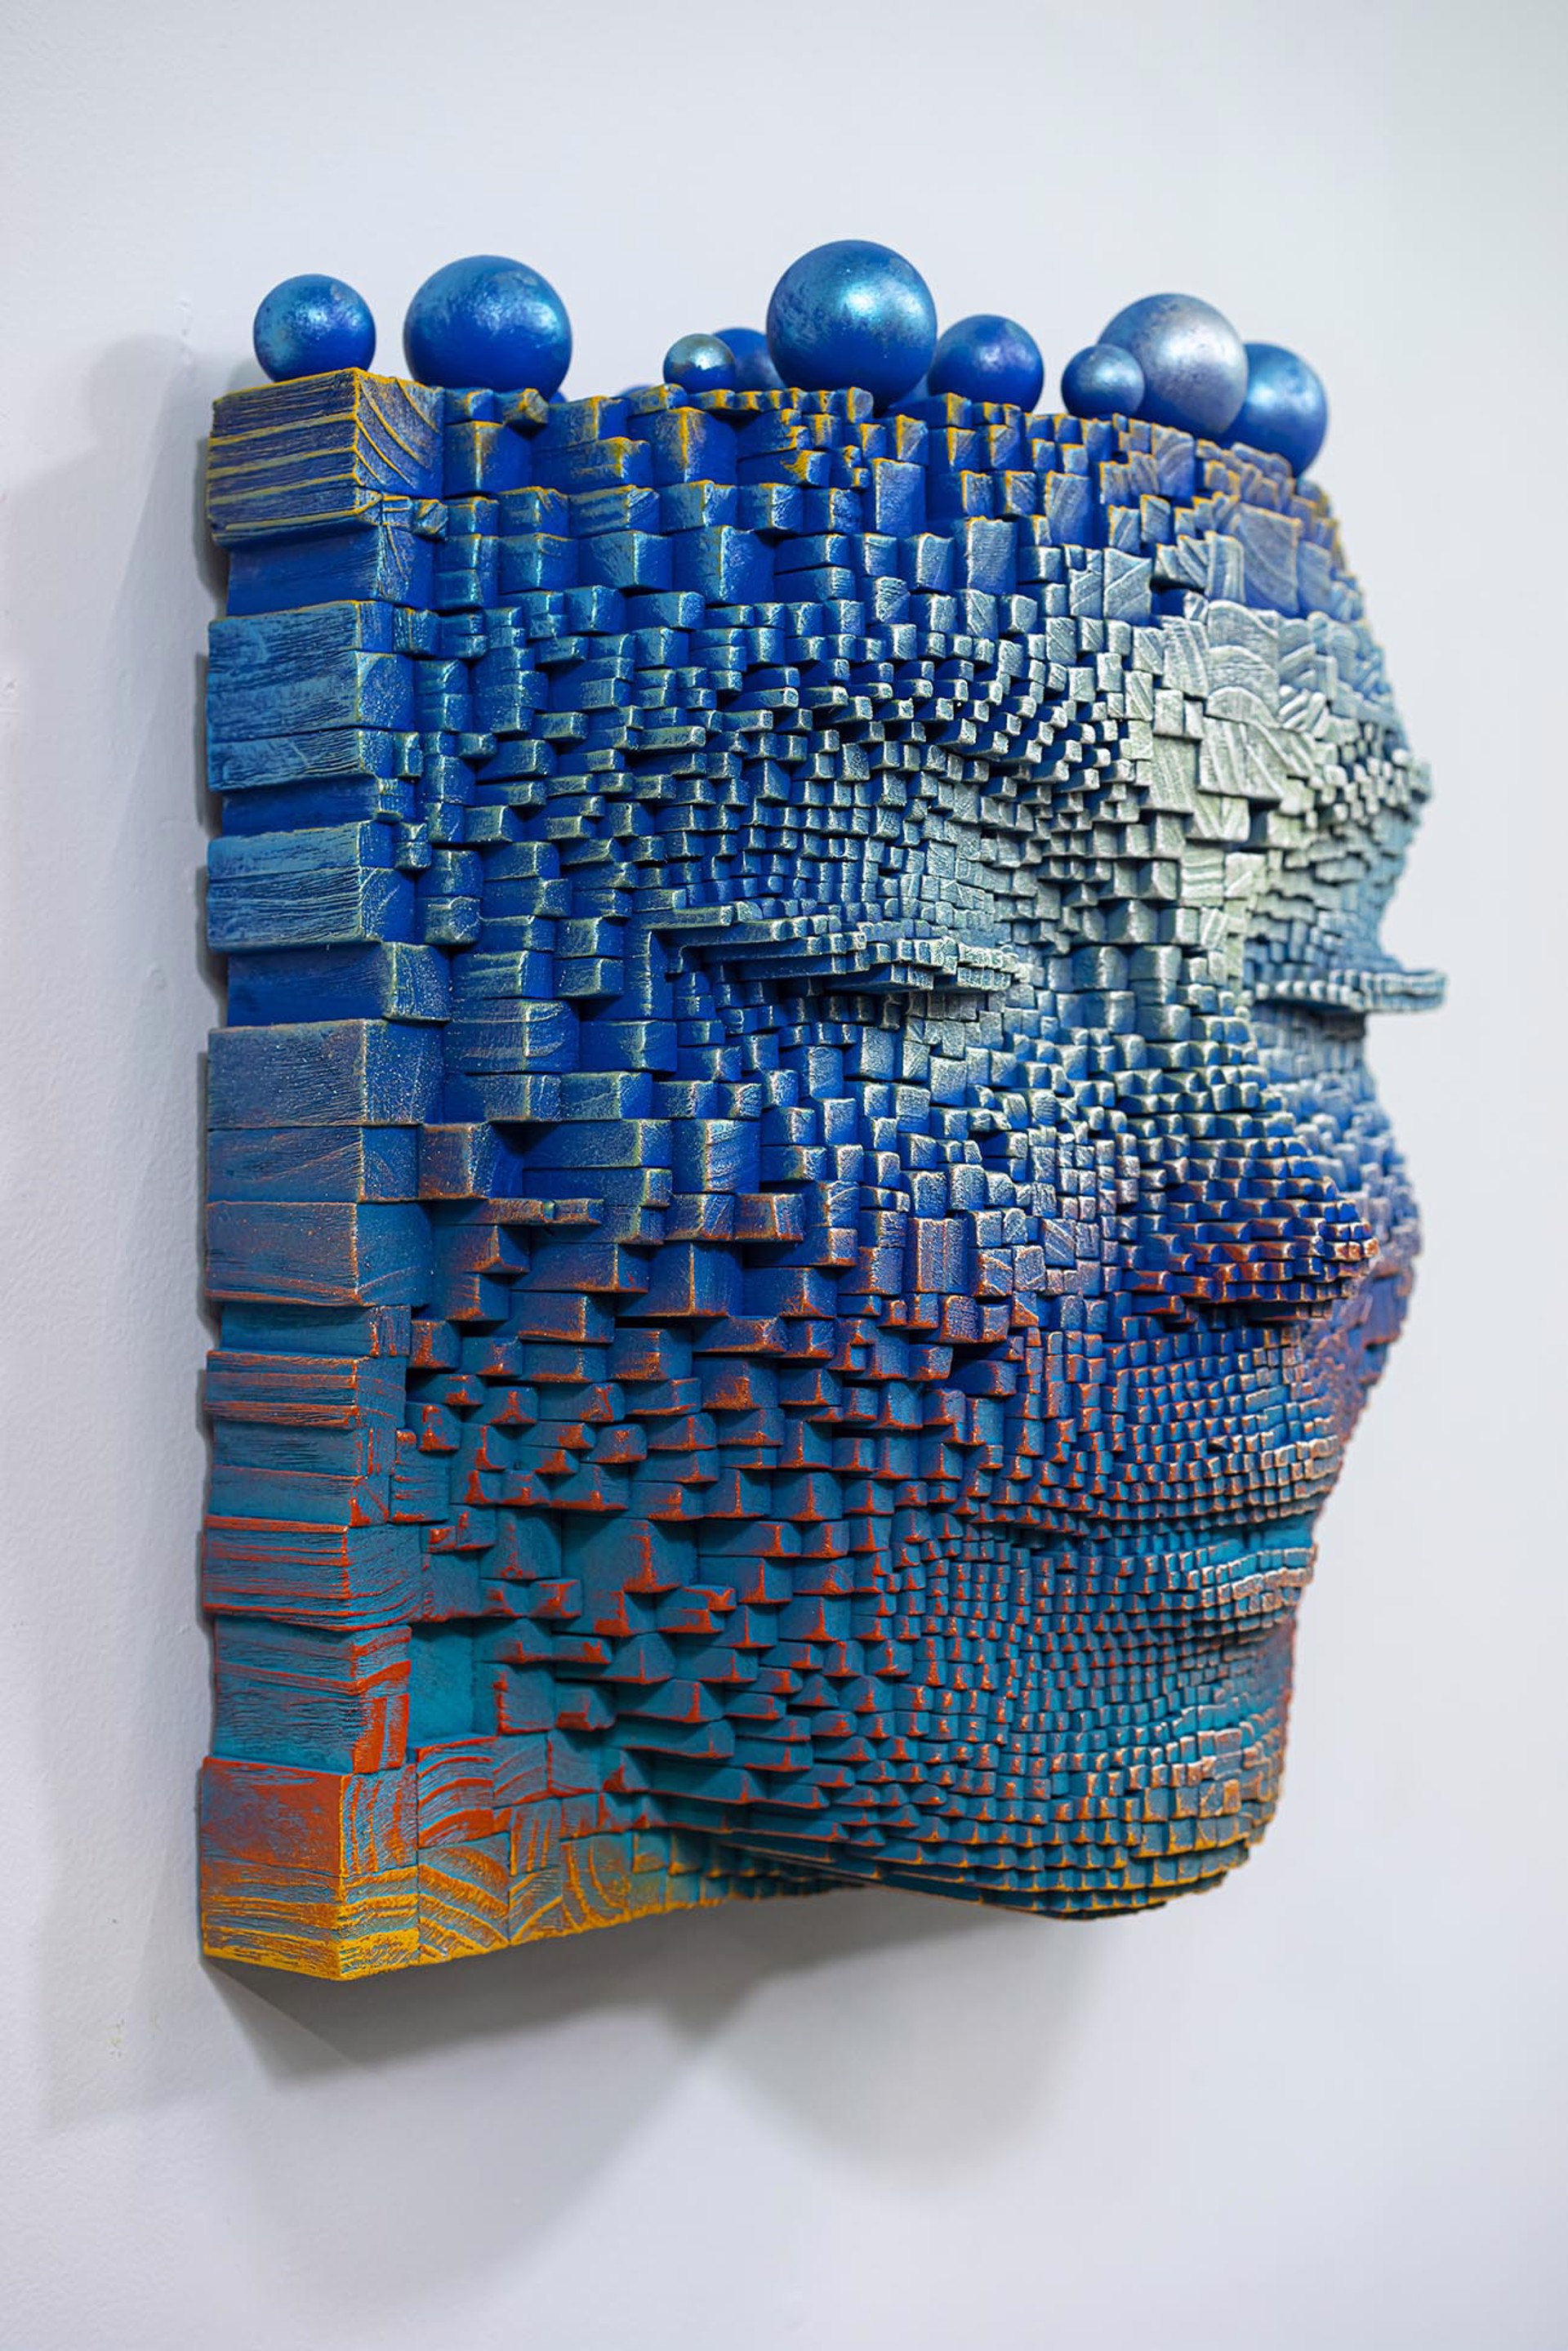 Mask #225 by Gil Bruvel